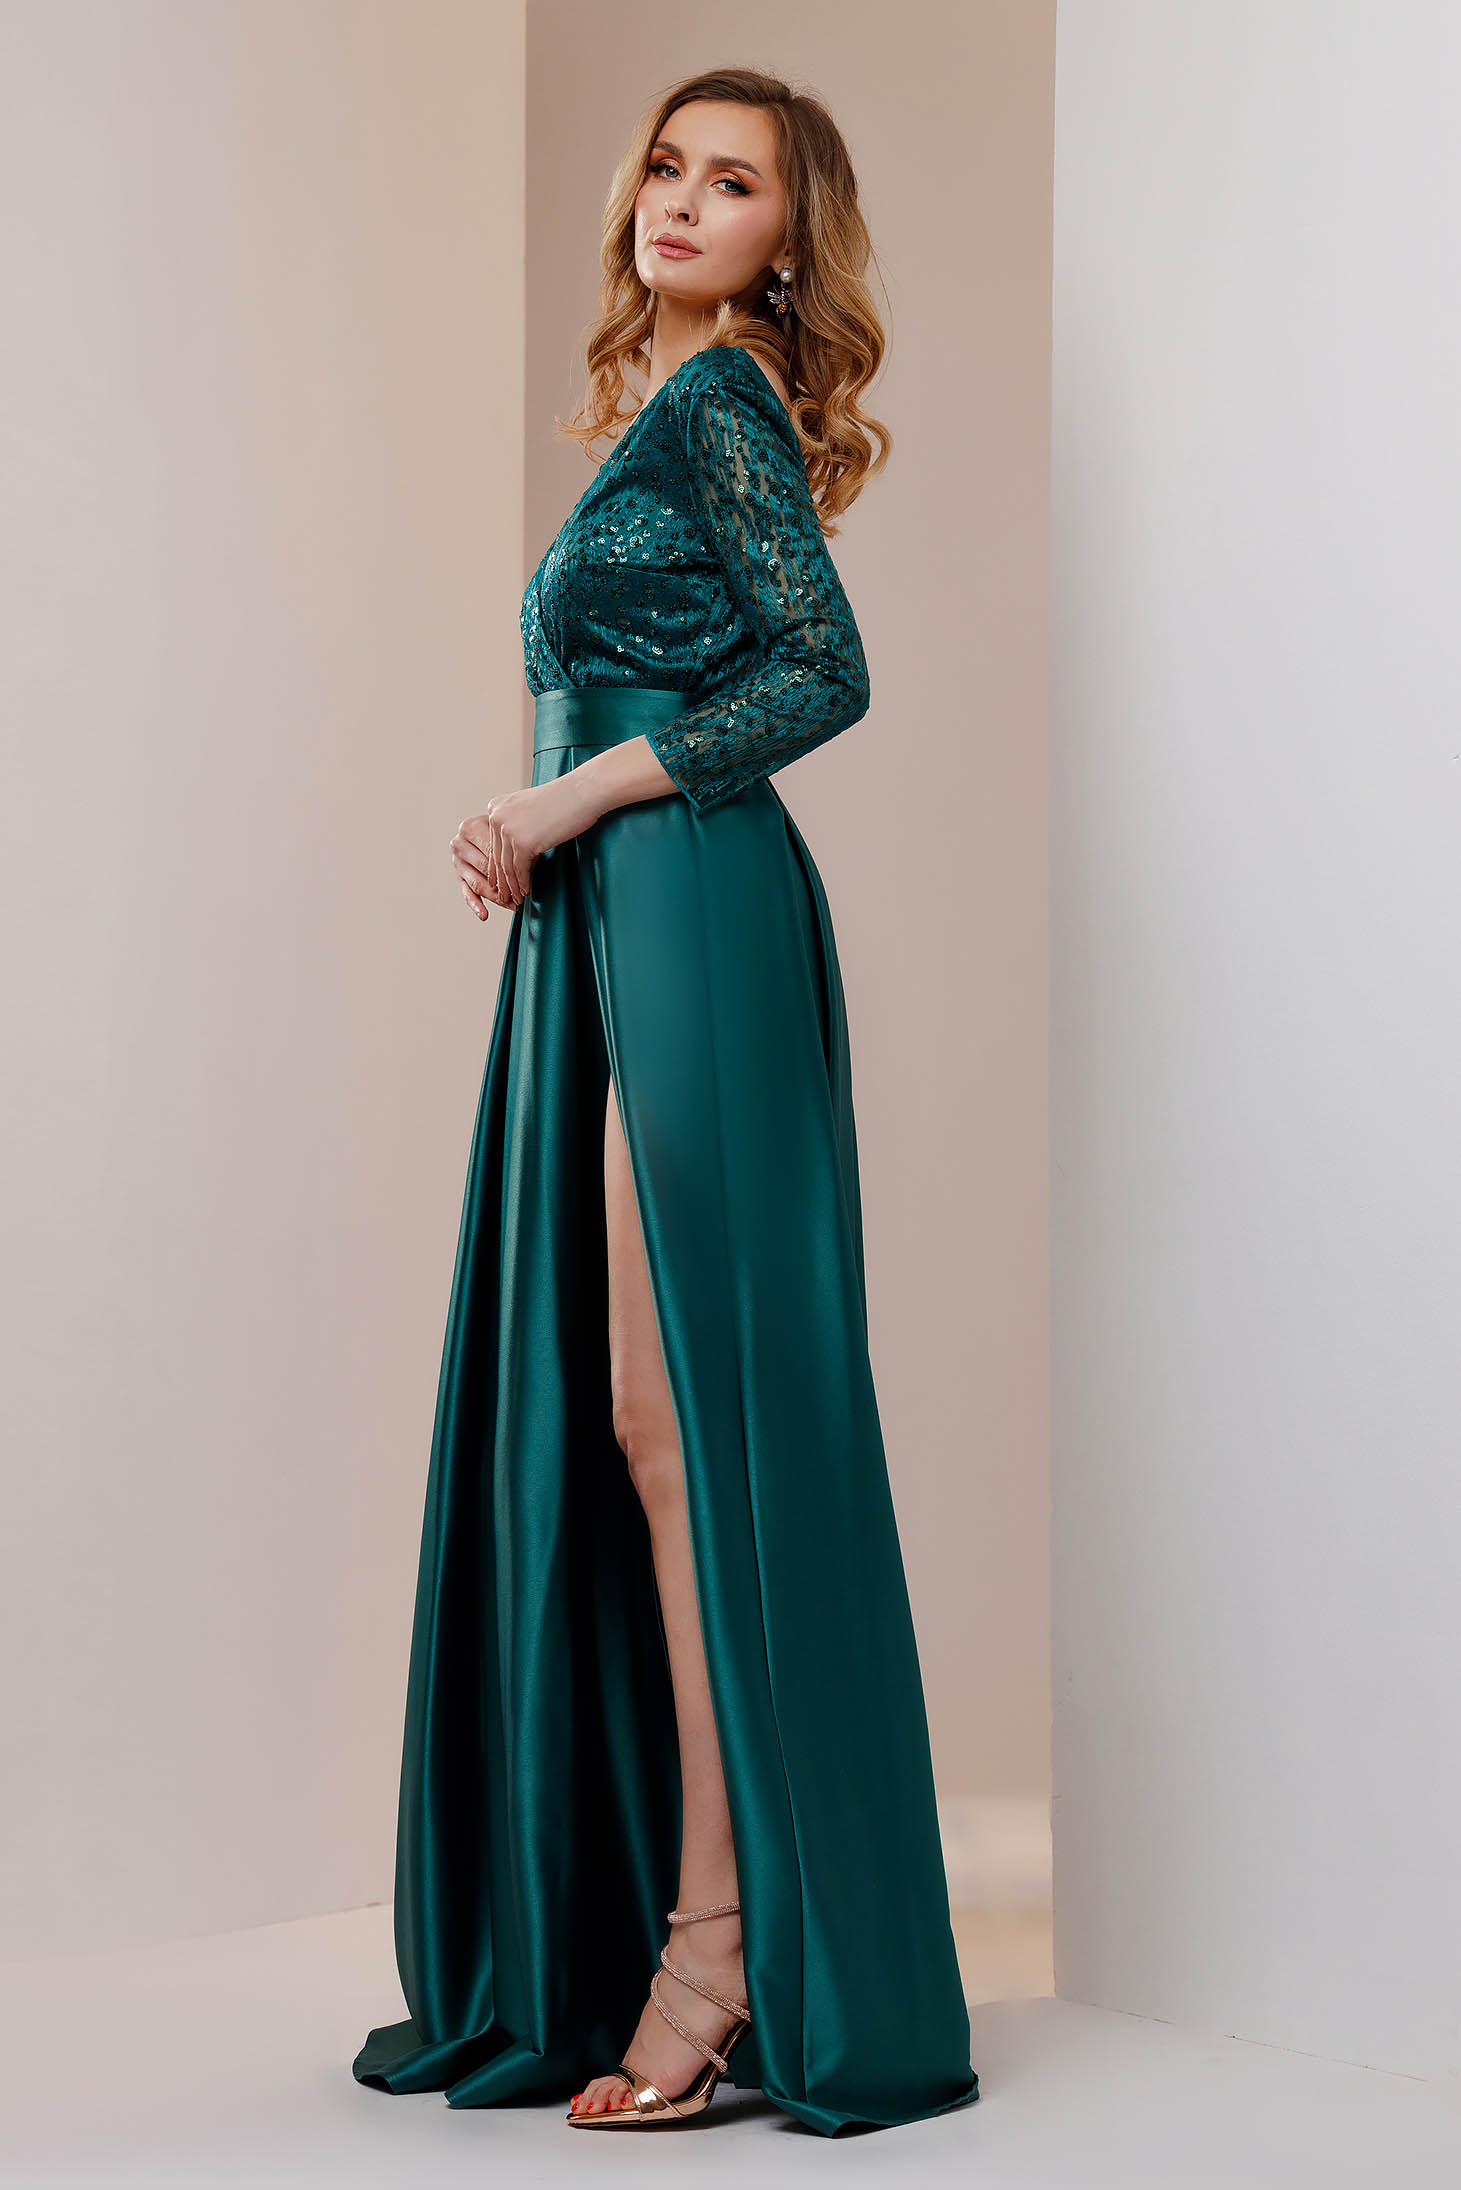 Green dress long taffeta with v-neckline with sequin embellished details 2 - StarShinerS.com